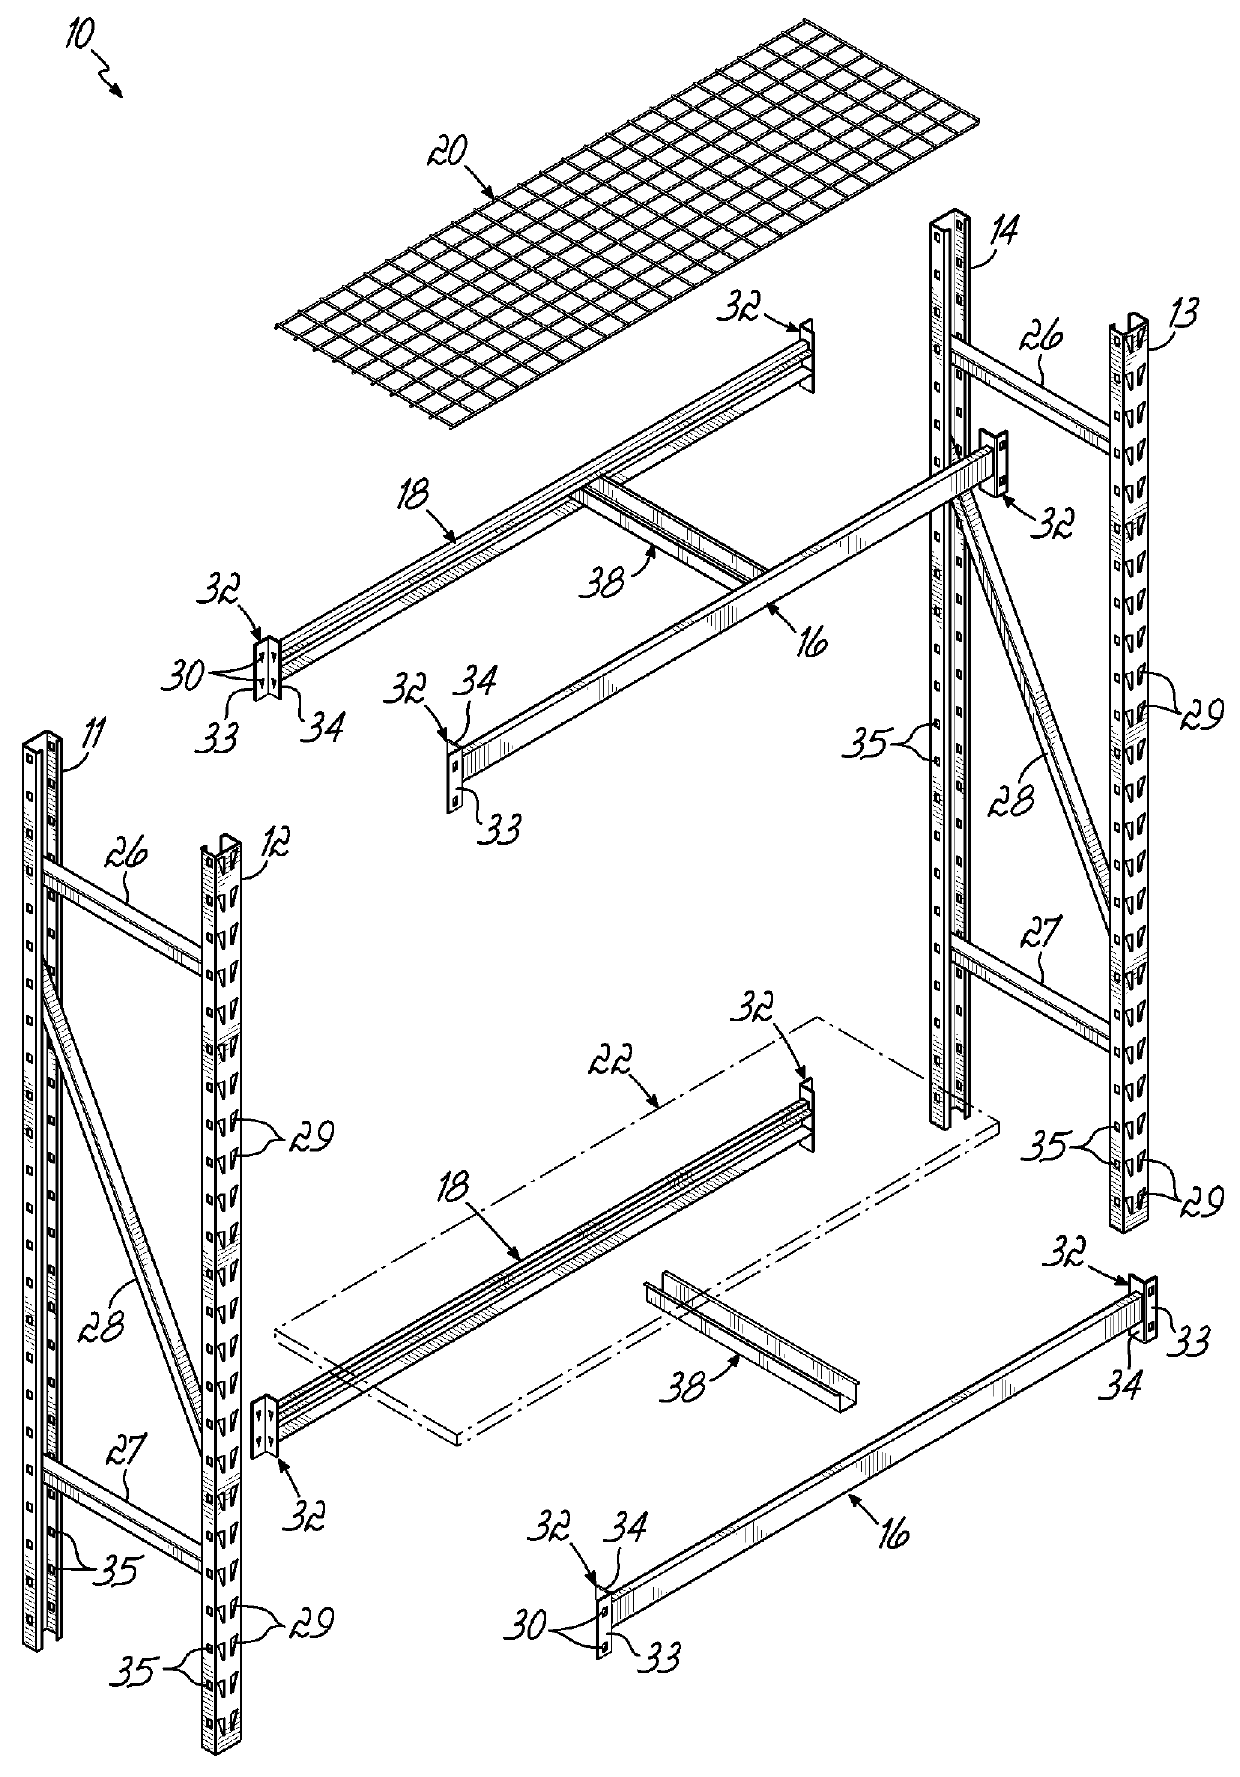 Portion of shelf and support for shelving unit